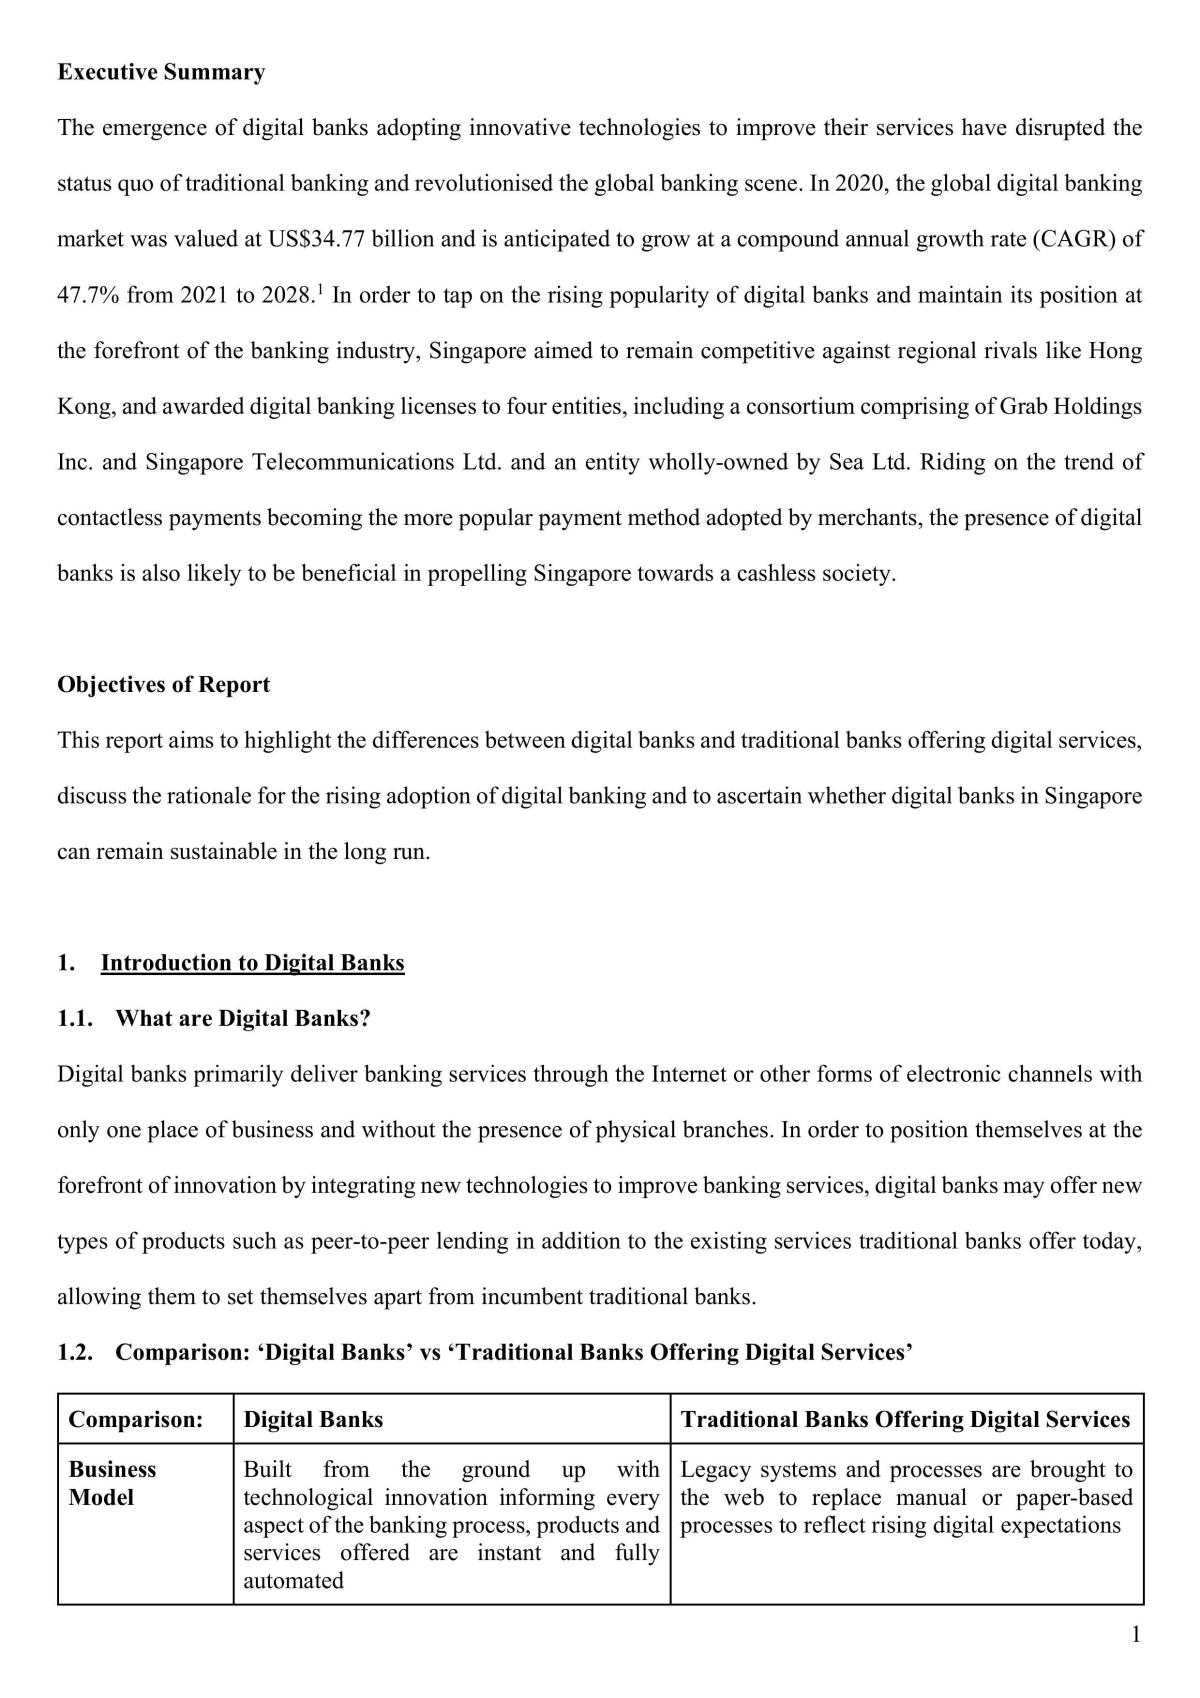 FIN3703 - Digital Bank Project - Page 3